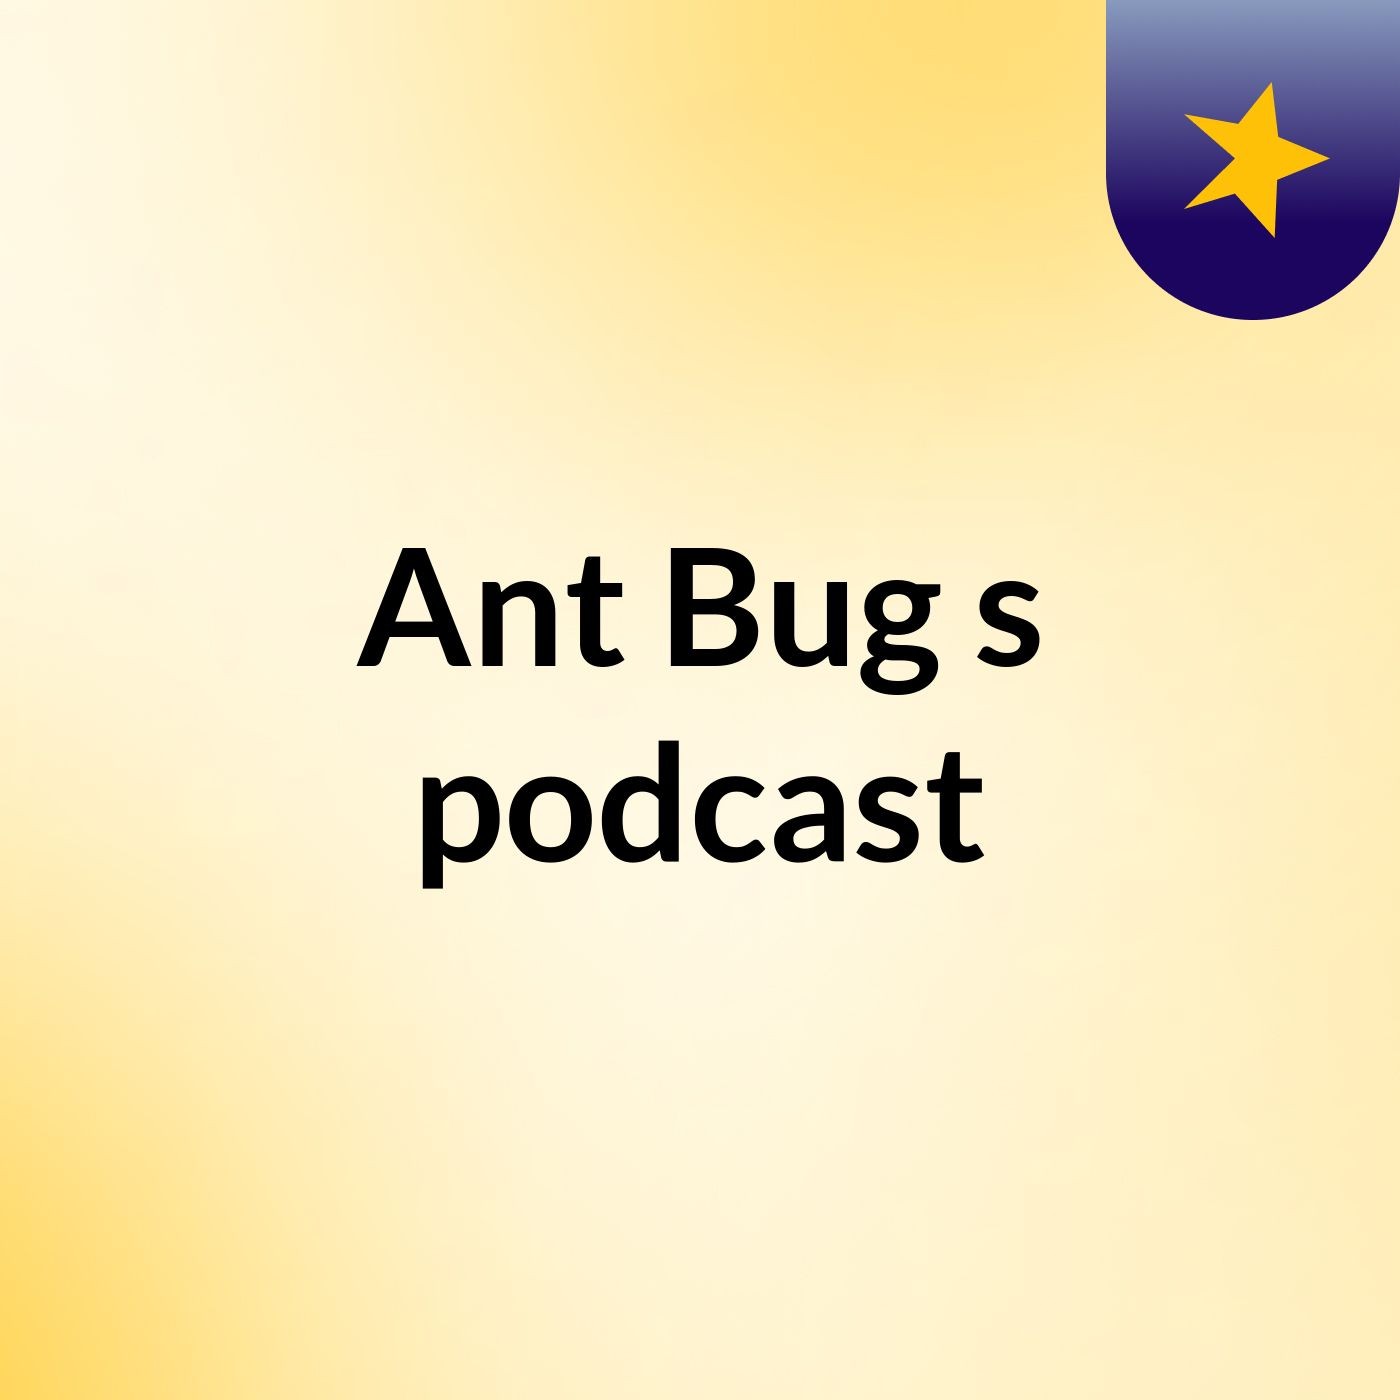 Ant Bug's podcast